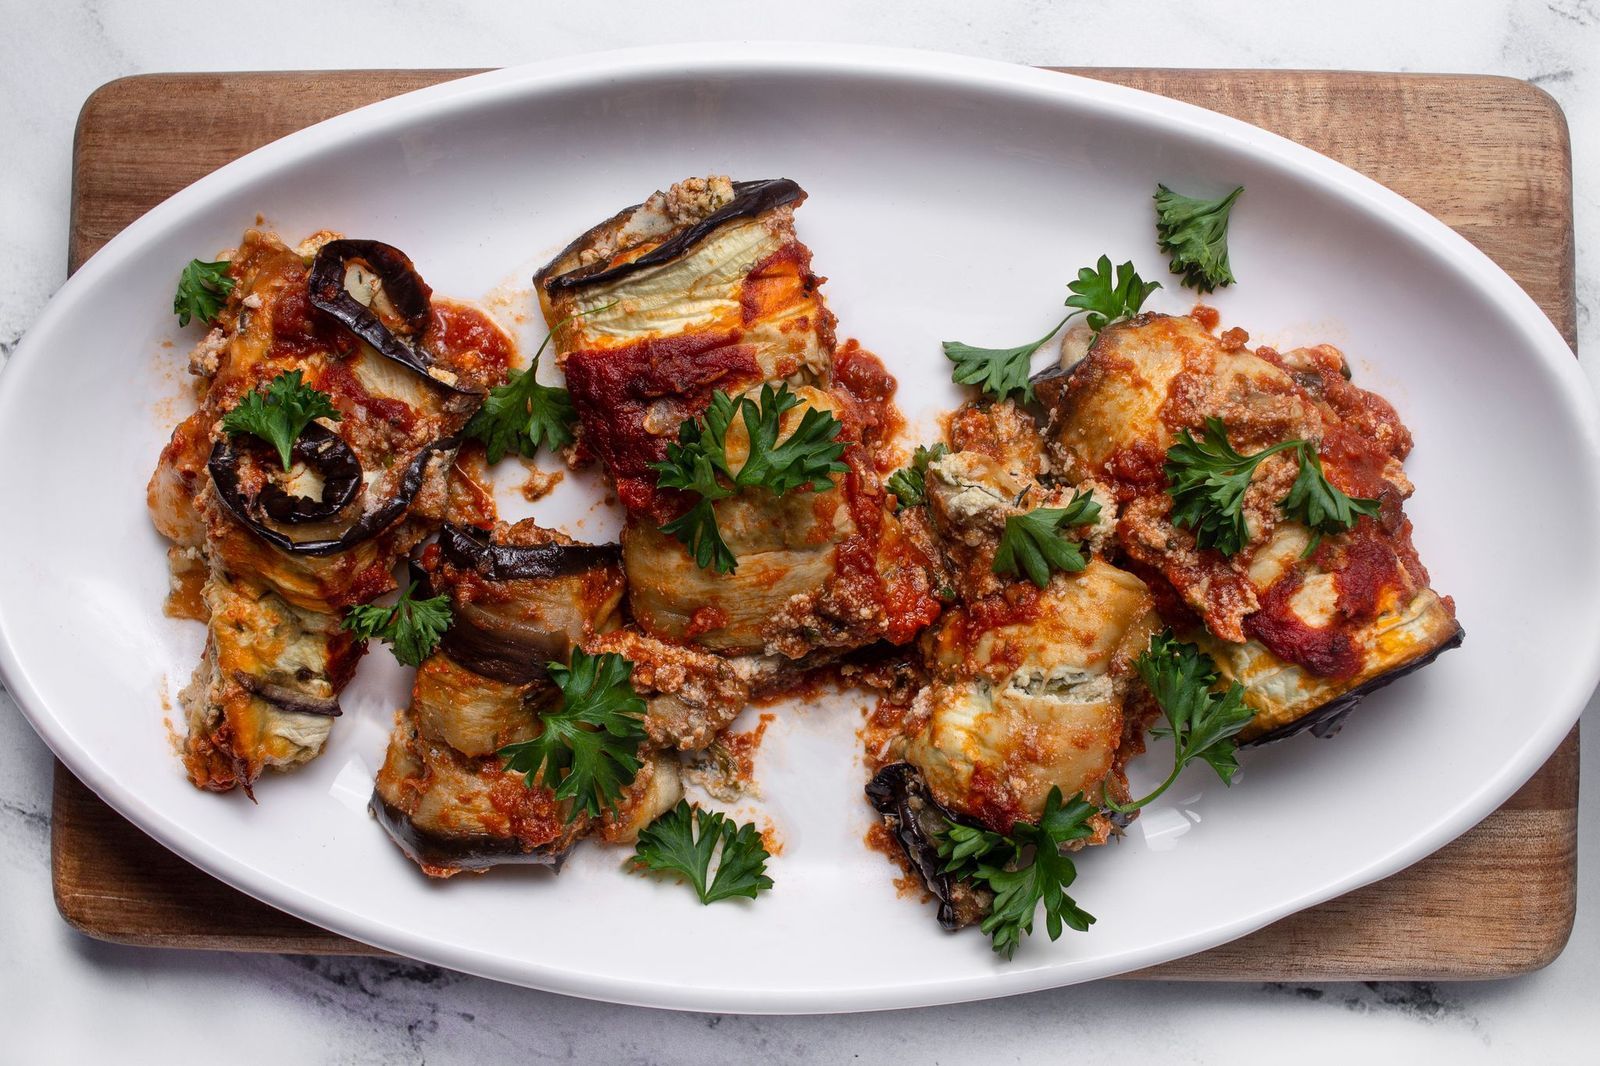 Fody's Eggplant Rollatini with Vegan Bolognese